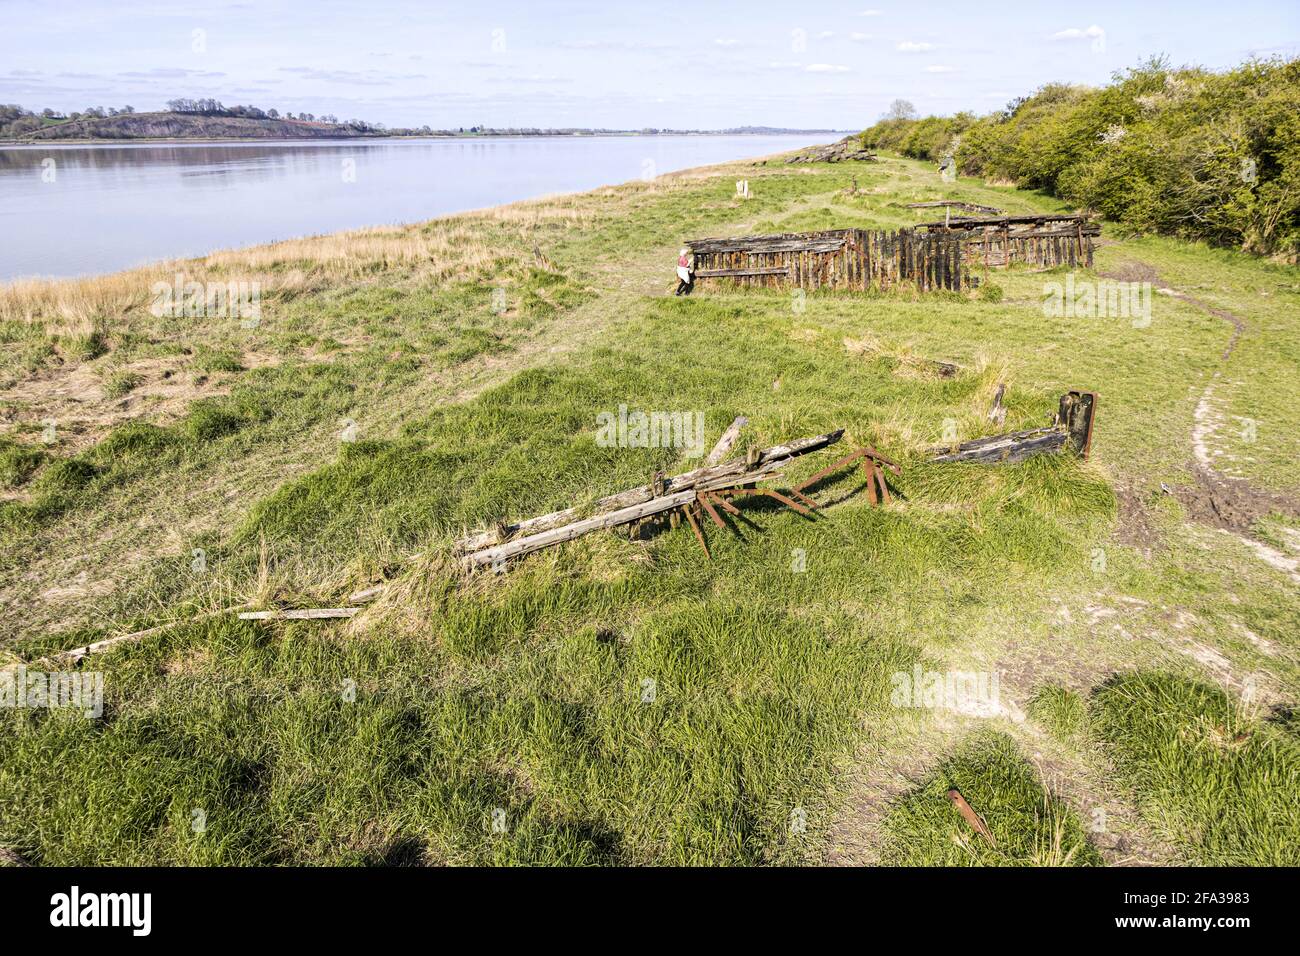 The remains of a number of vessels deliberately beached on the banks of the River Severn to prevent erosion at The Purton Hulks or Ships Graveyard. Stock Photo